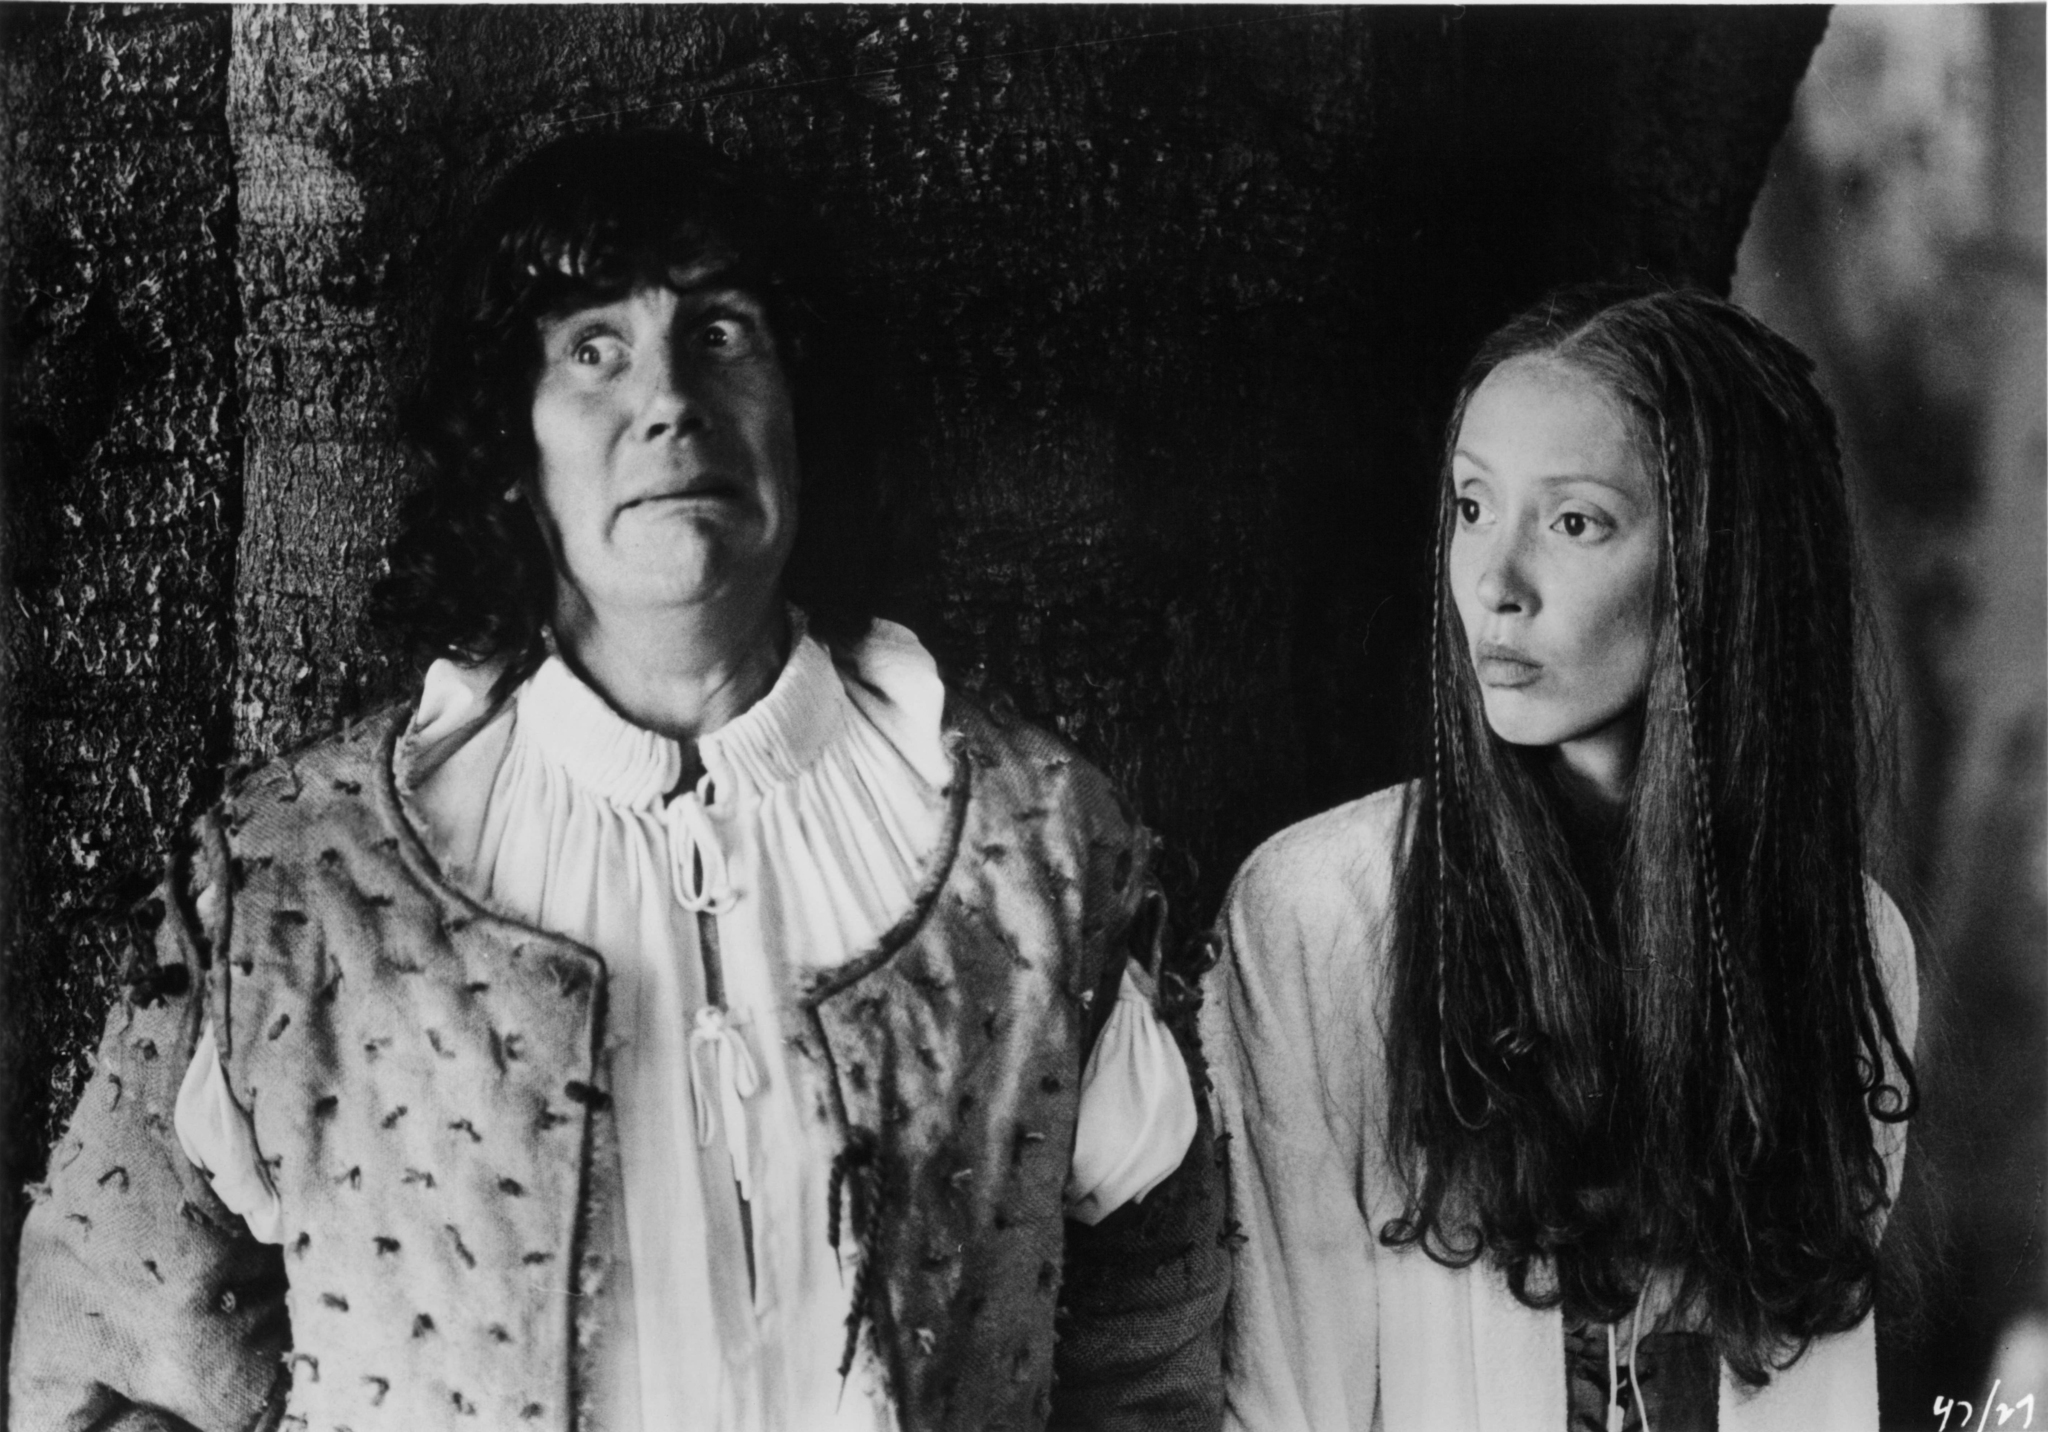 Still of Shelley Duvall and Michael Palin in Time Bandits (1981)